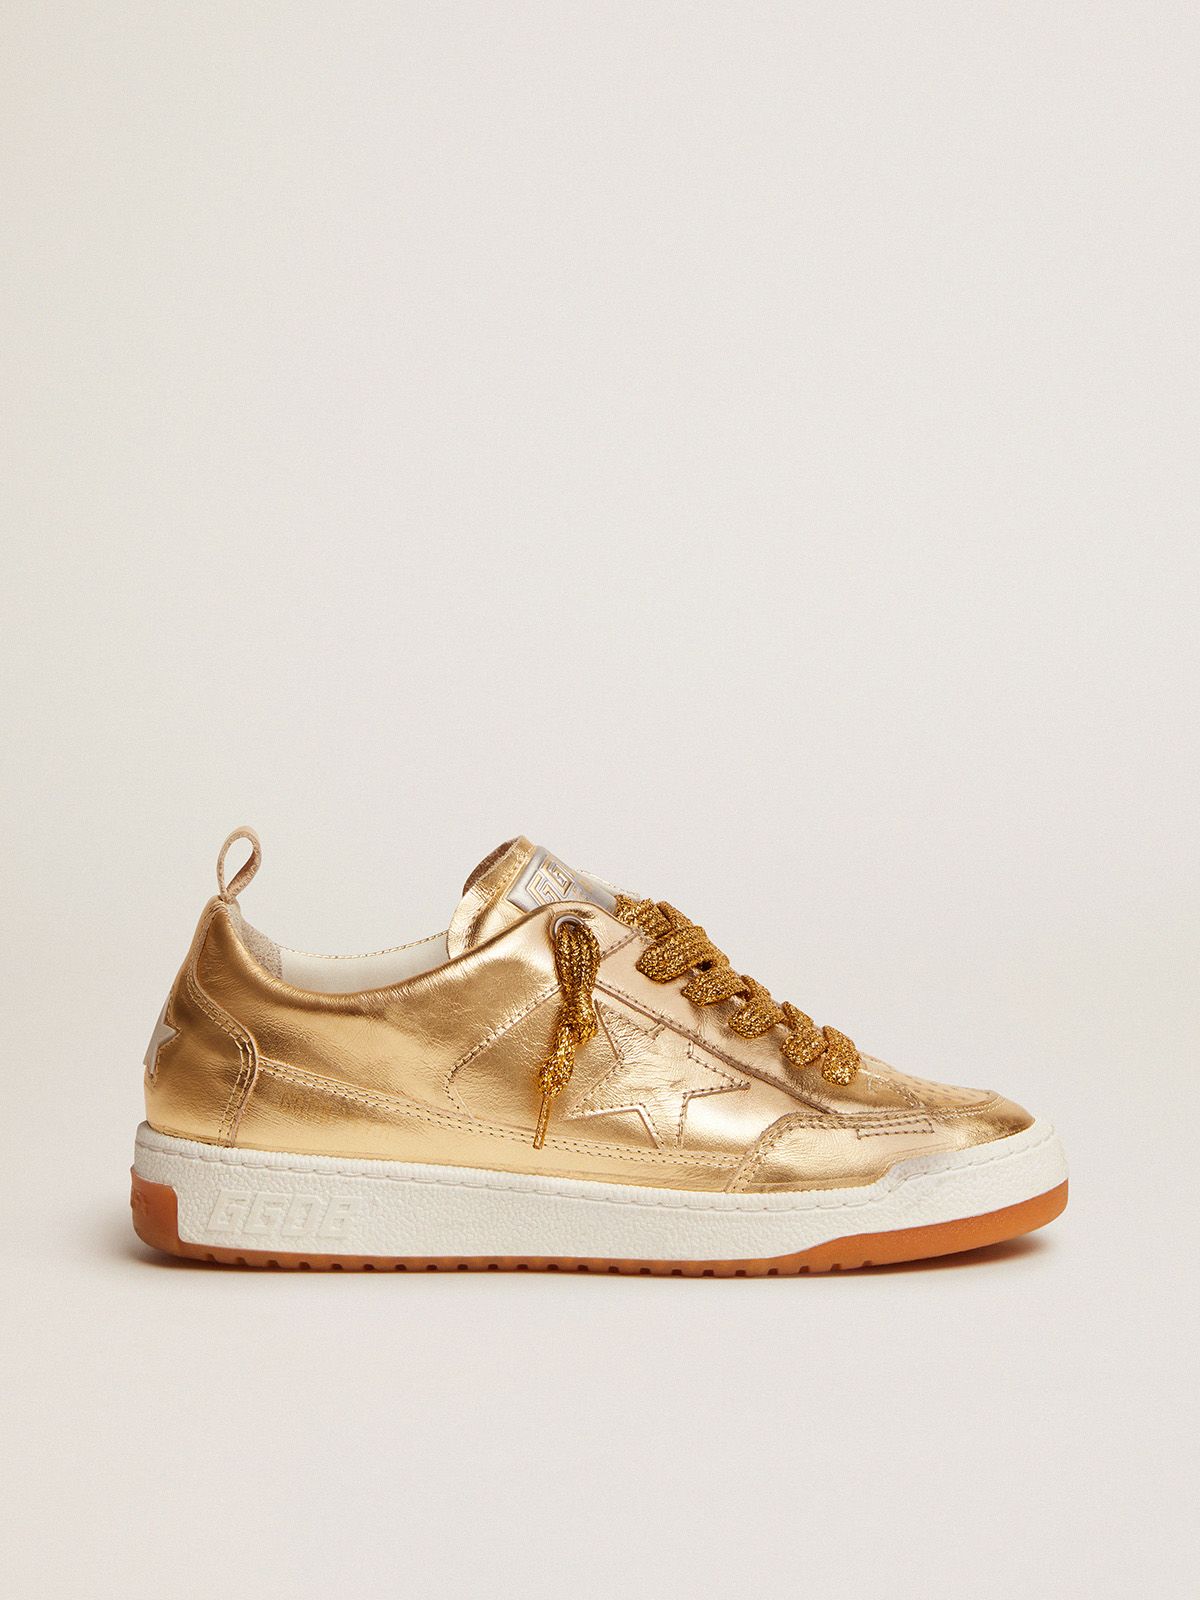 golden goose Yeah in laminated sneakers leather gold